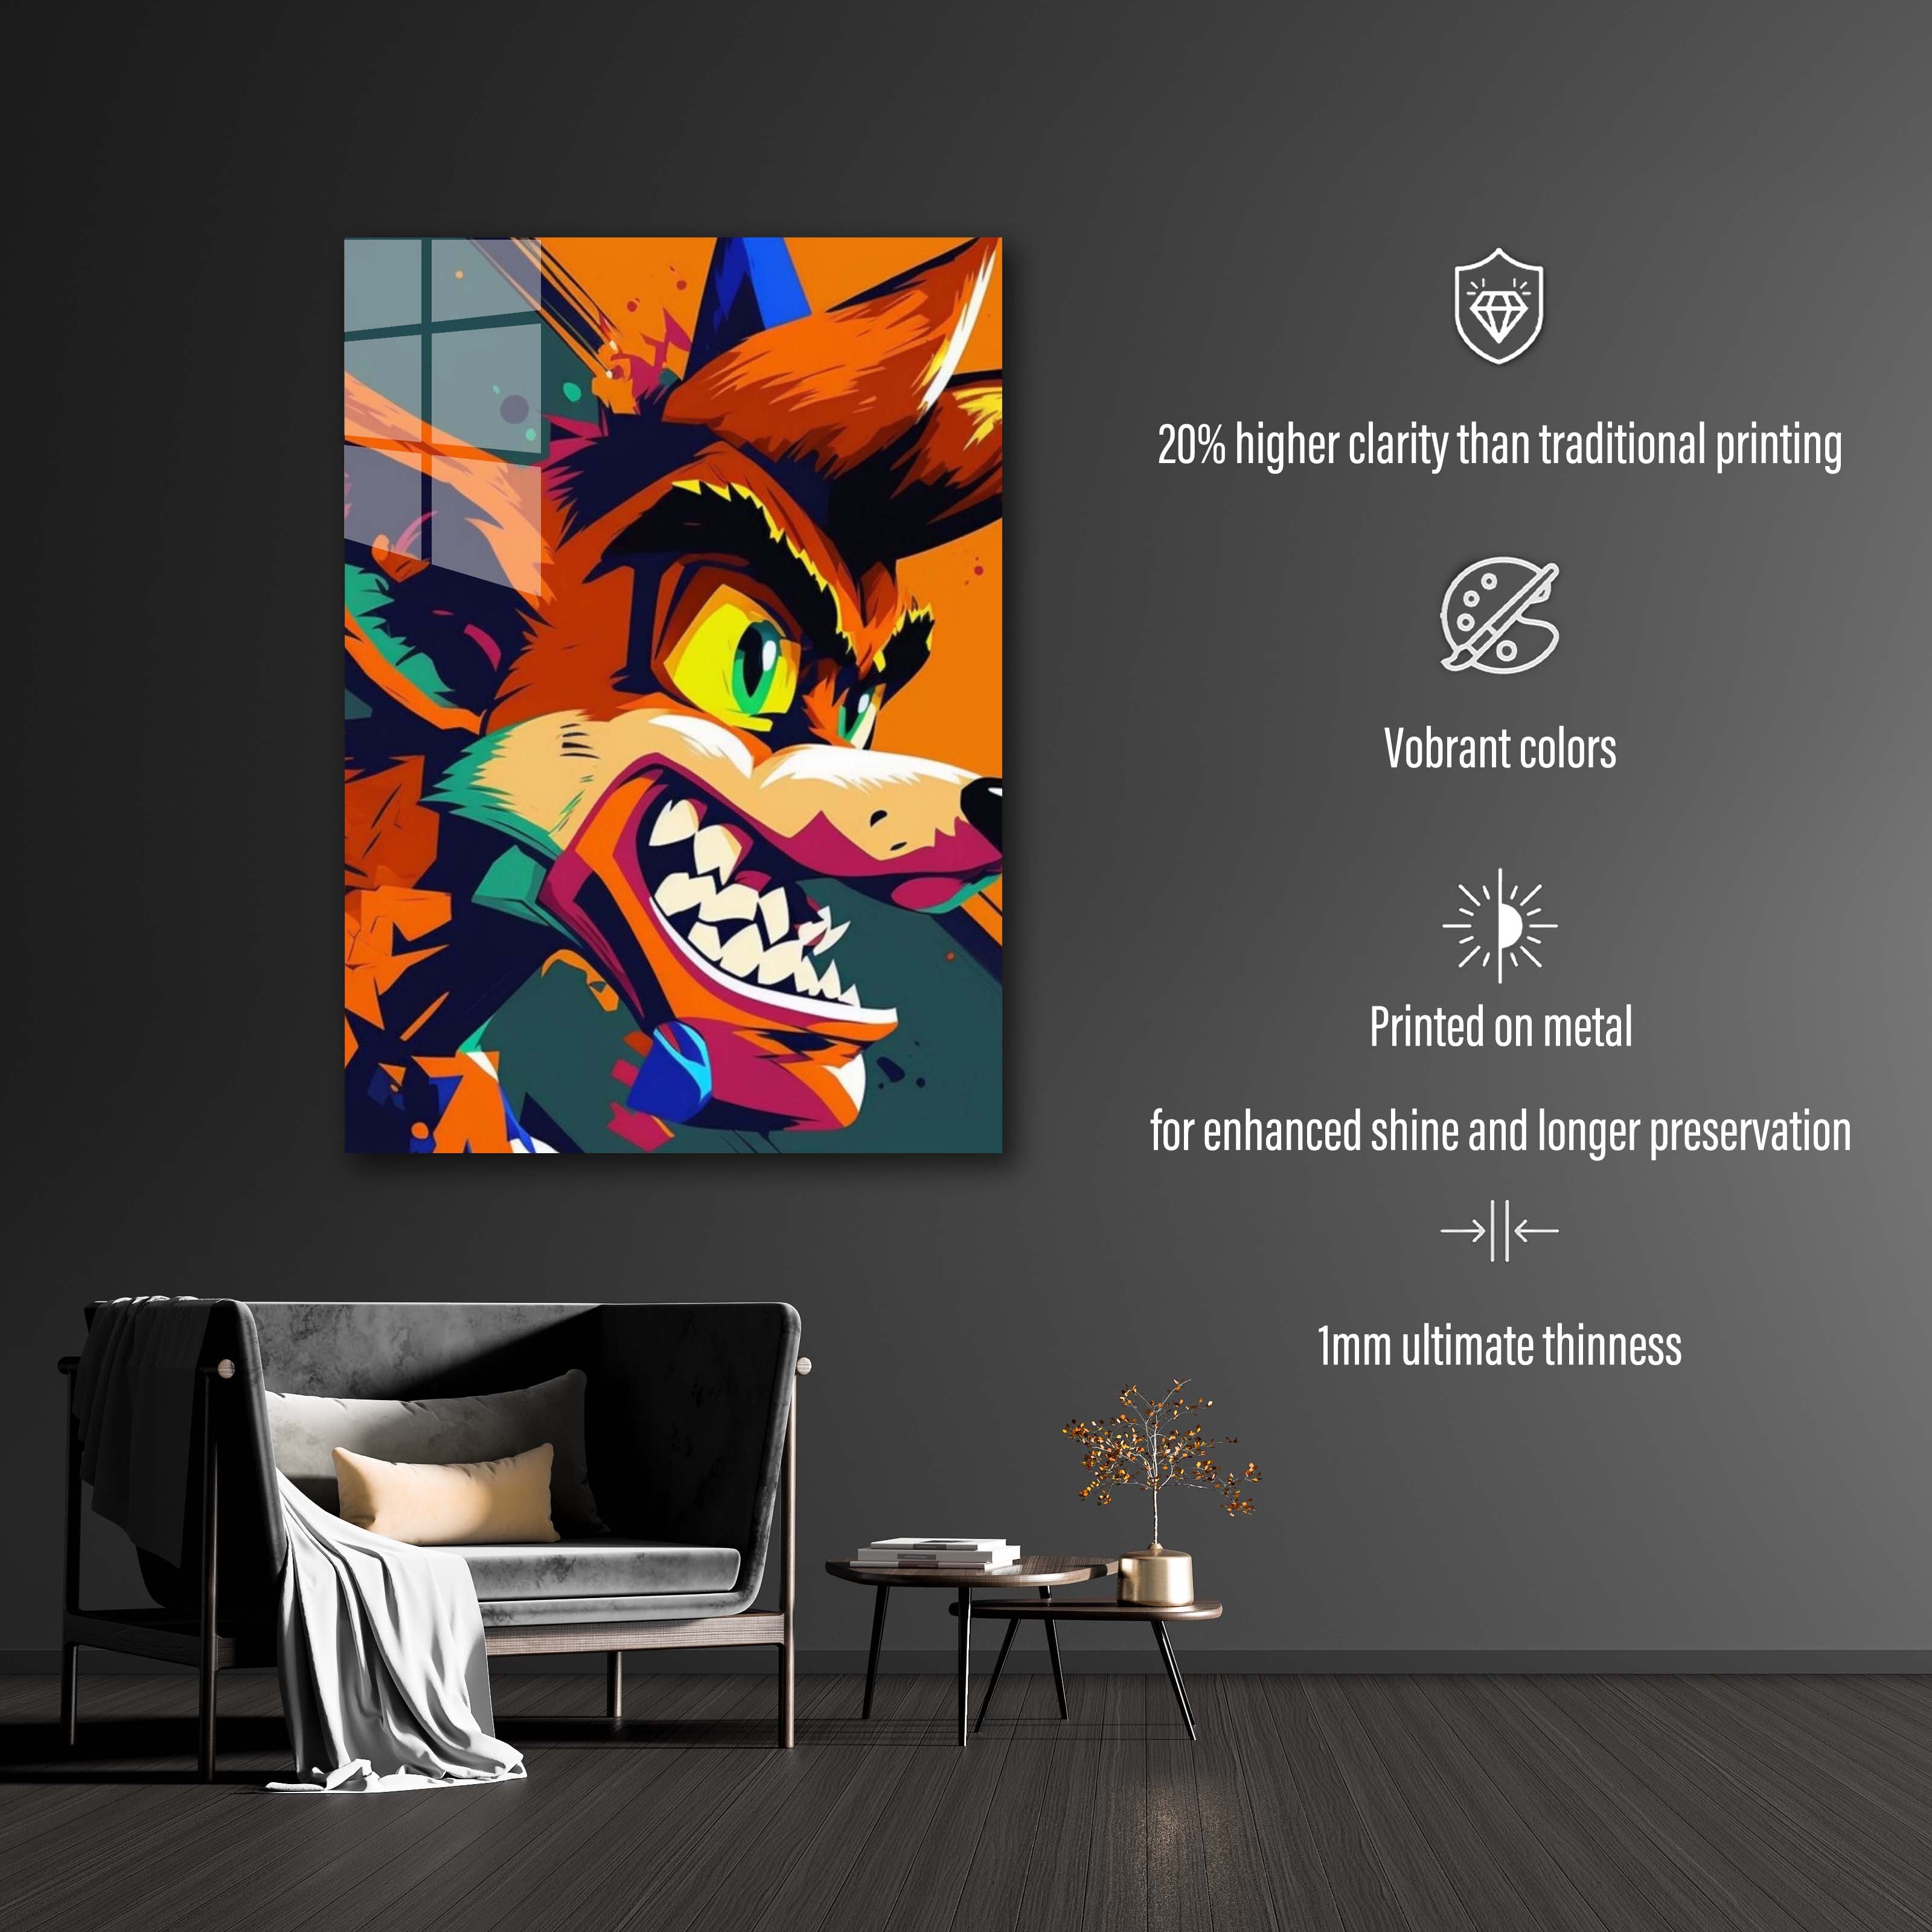 Crash Angry-Artwork by @VICKY